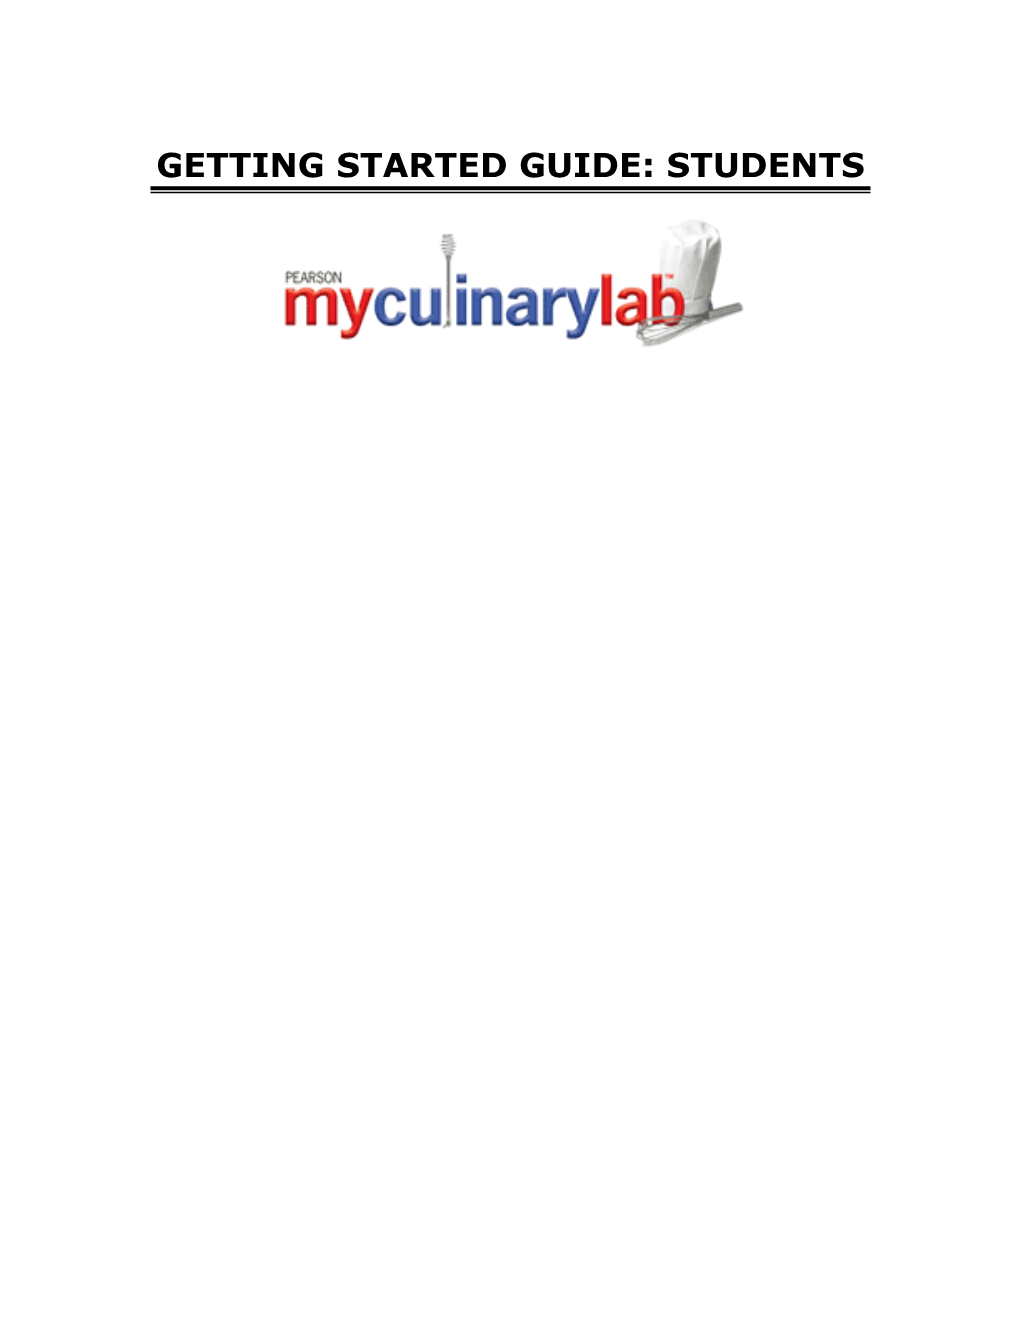 Getting Started Guide: Students